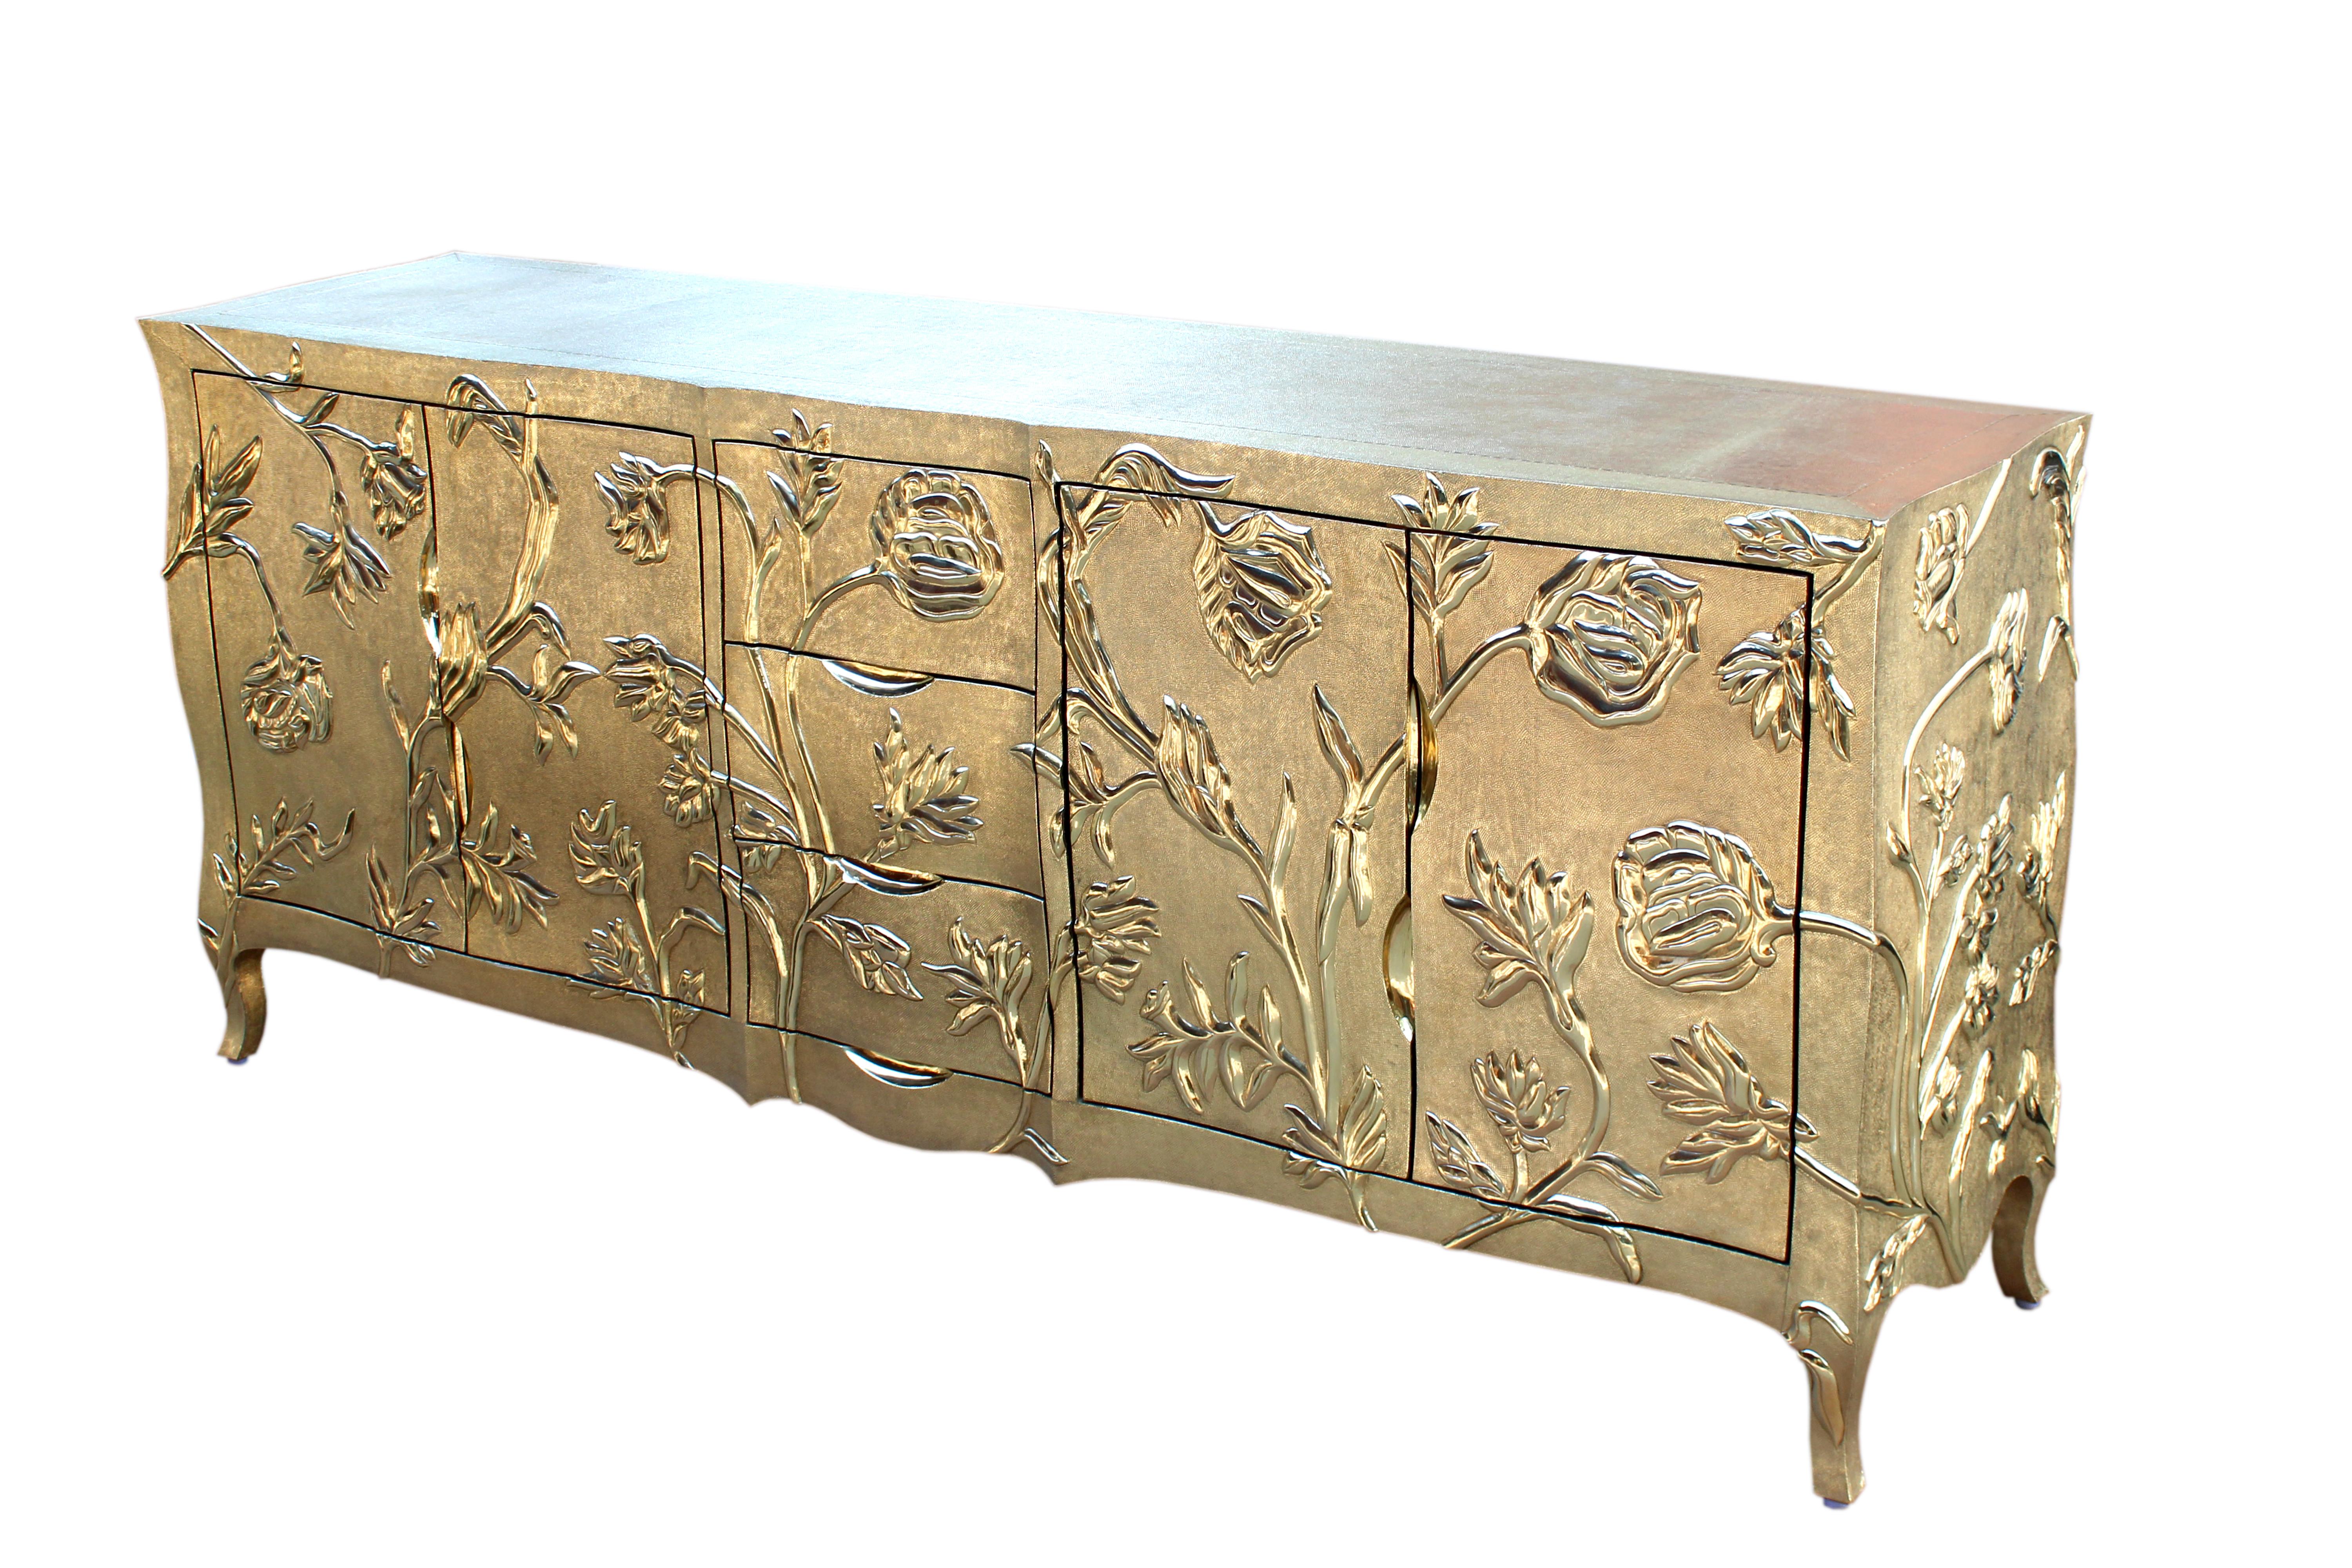 This beautiful and elegant piece is inspired by two of the best-selling pieces in the Stephanie Odegard collection: The Foral Credenza, inspired by the floral motifs used in the paintings of the palaces of Rajasthan; and Louise Credenza, by the